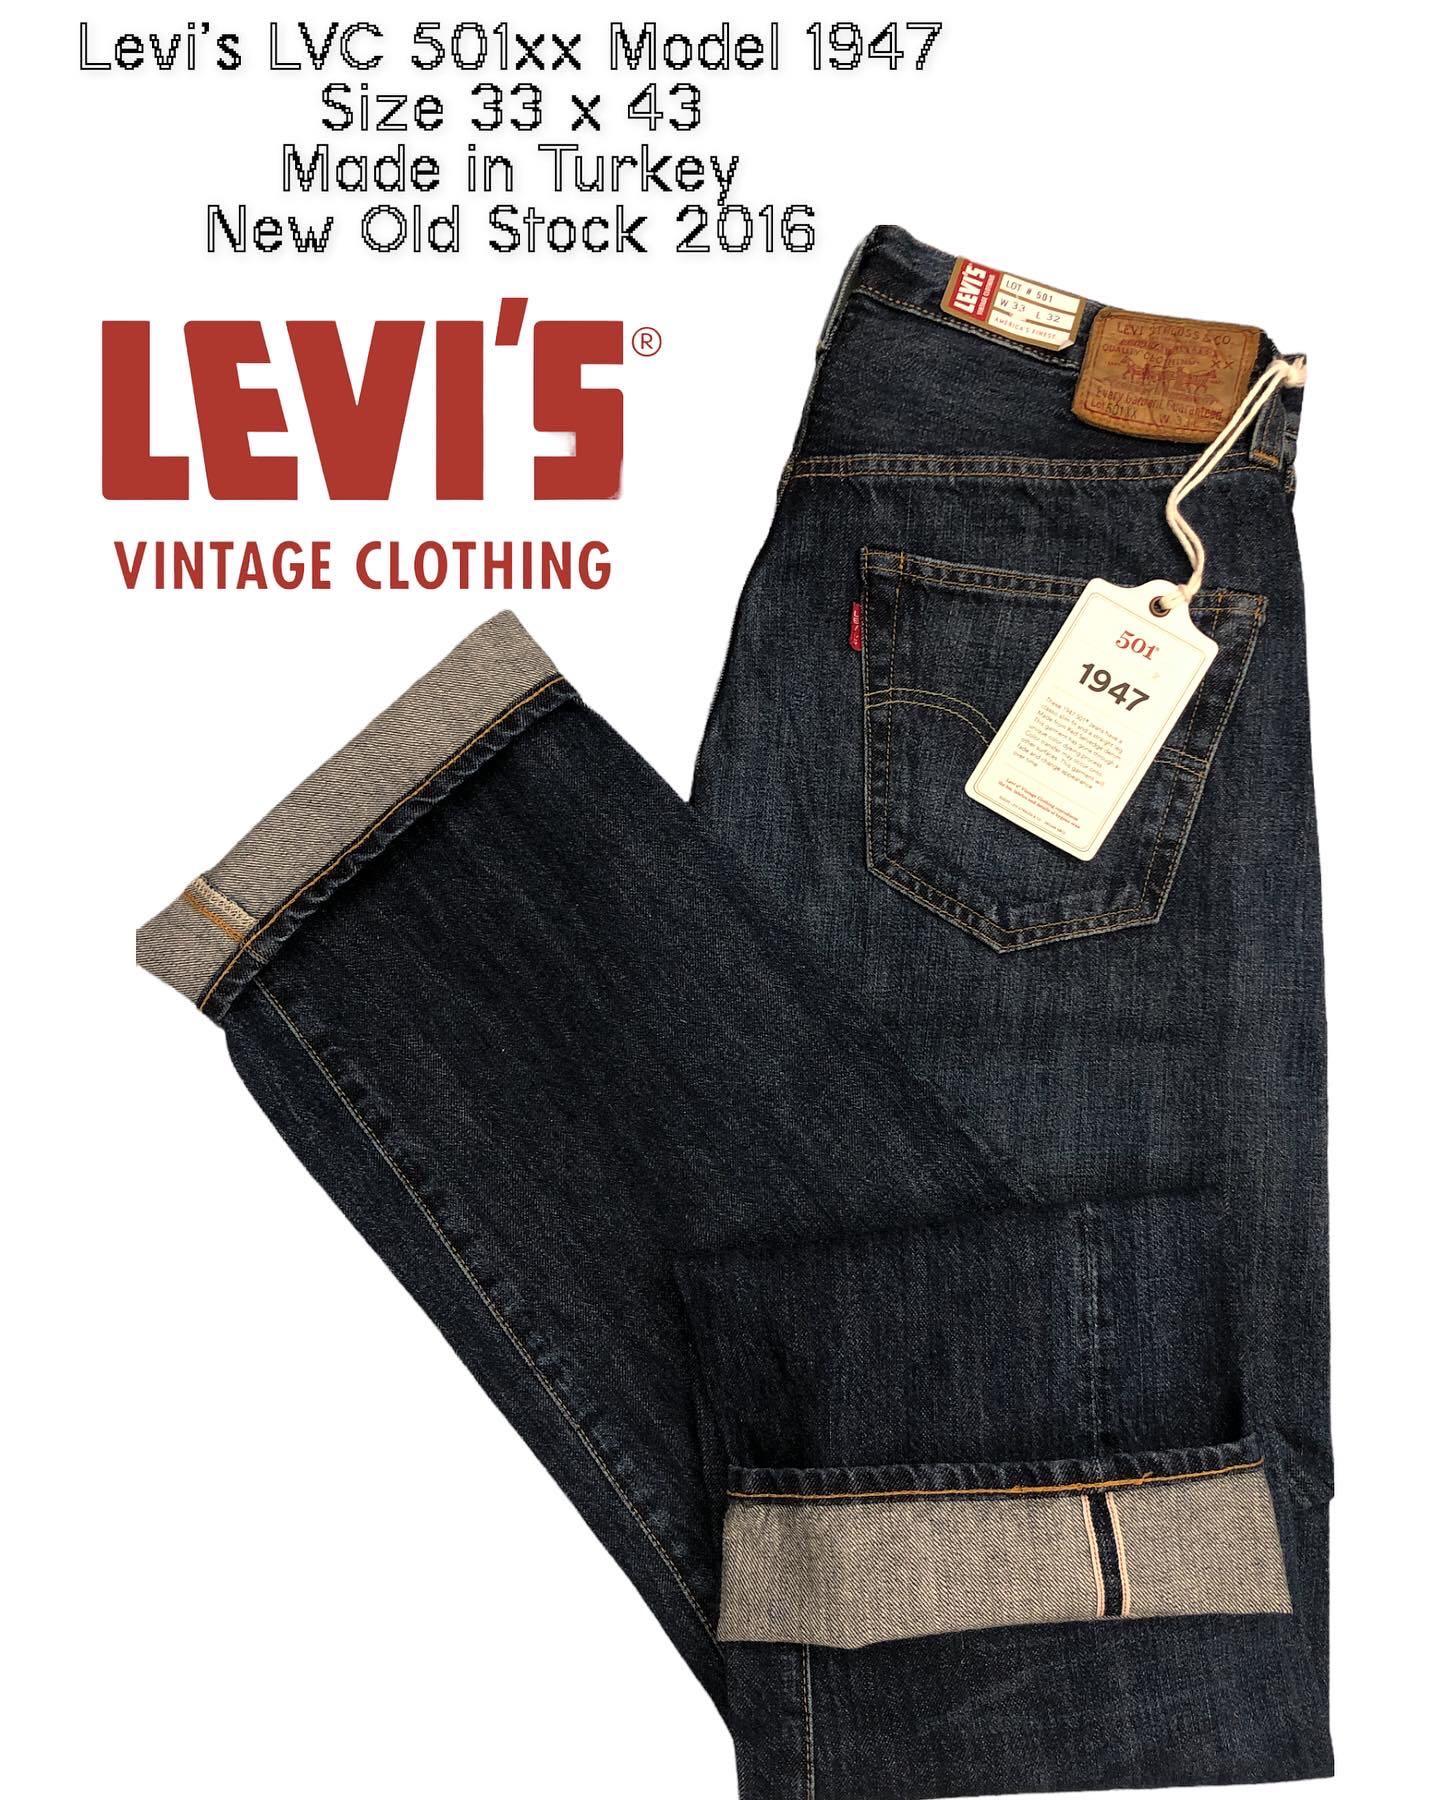 LEVIS LVC 501XX BIG E SELVEDGE NOS MADE IN JAPAN SIZE 32 & 32